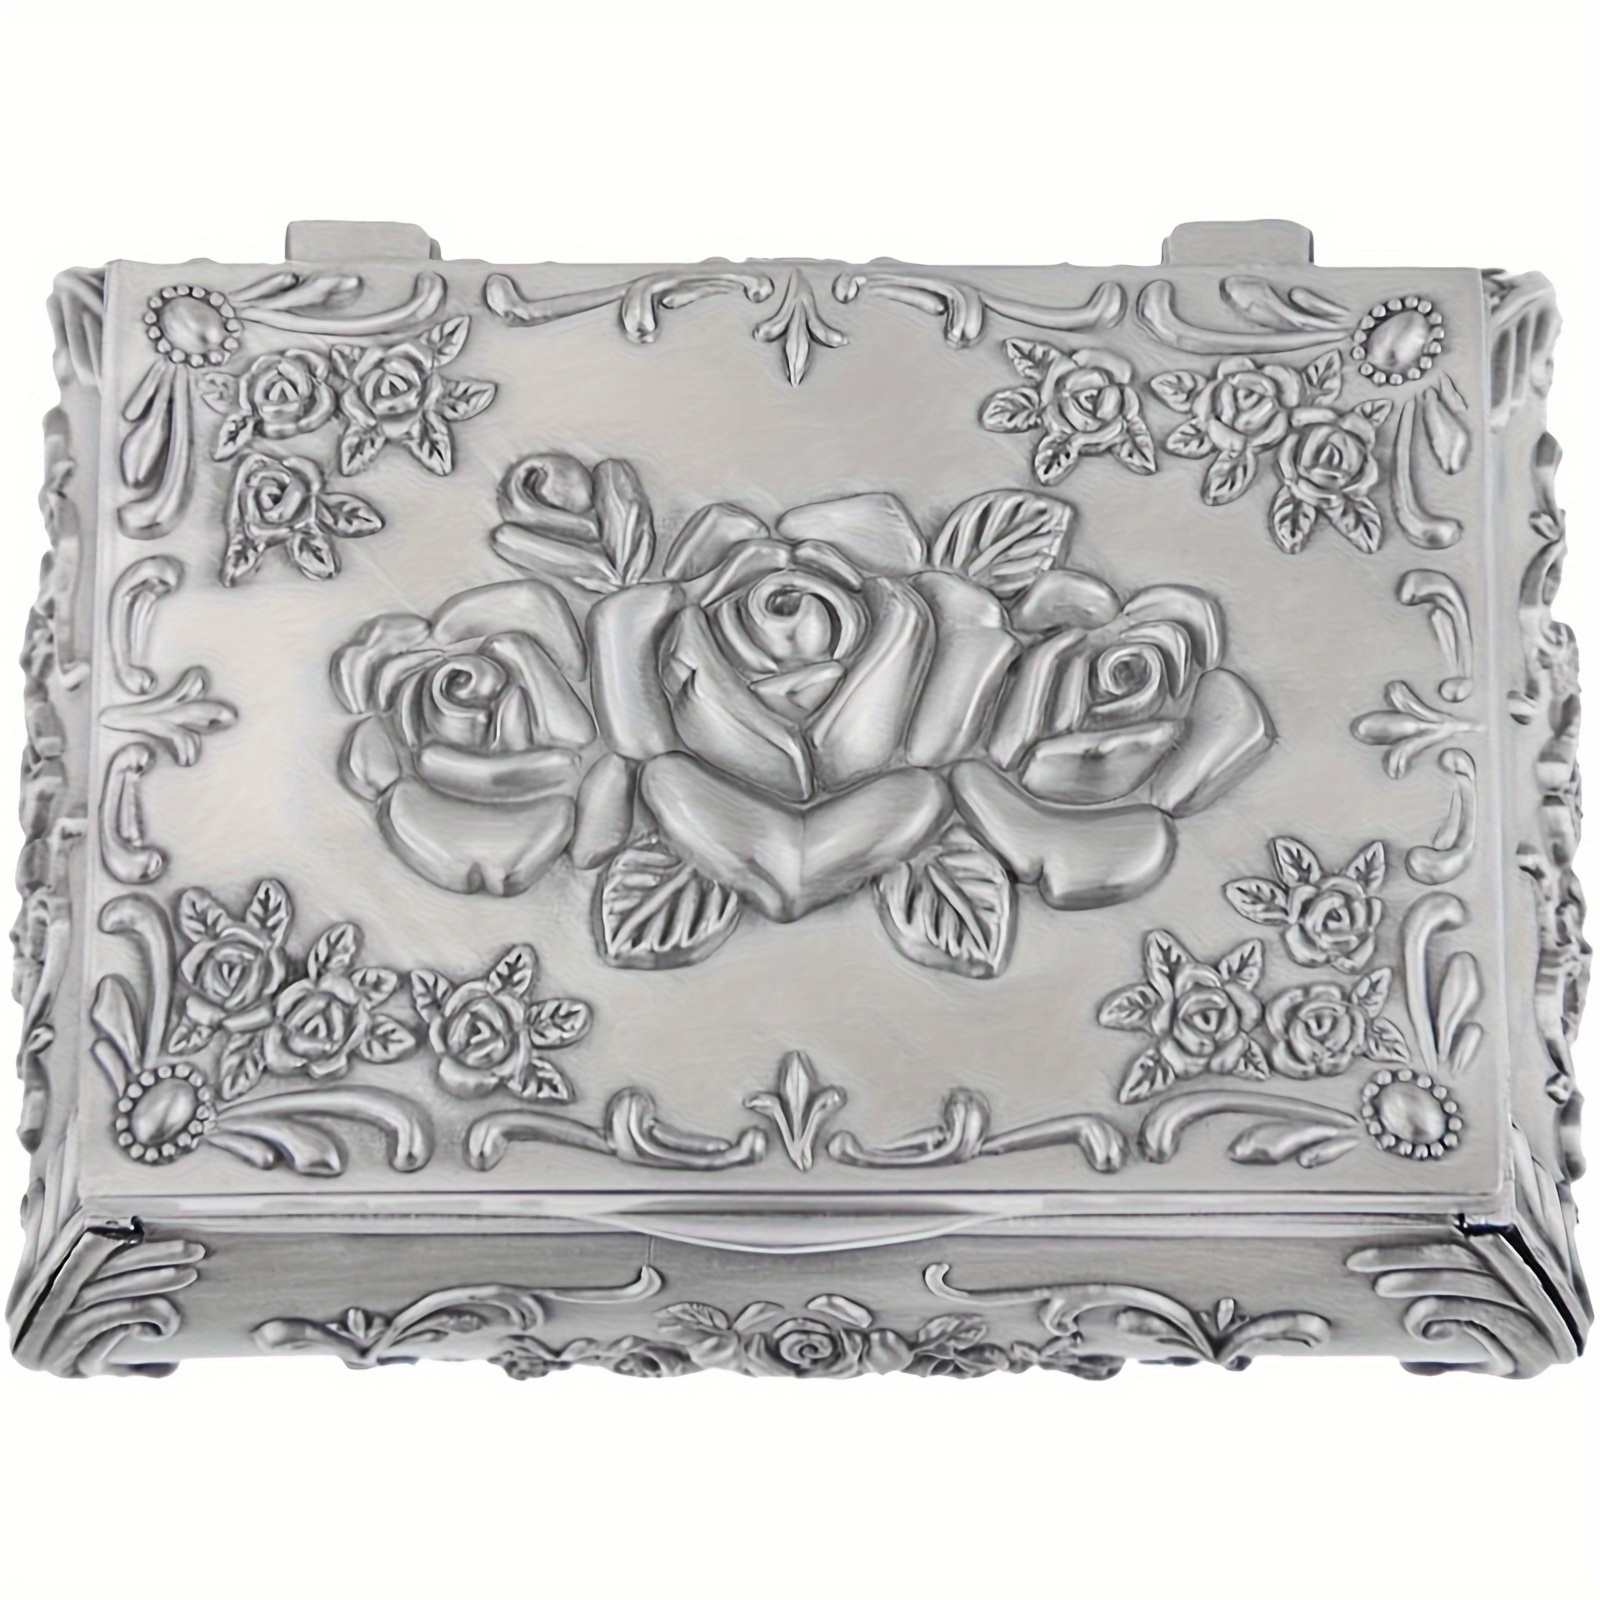 Vintage Jewelry Box, Metal Rectangular Small Jewelry Organizer Alloy  Flannel Trinket Box with Rose Engraved Design for Ring, Necklace, Earring,  Women